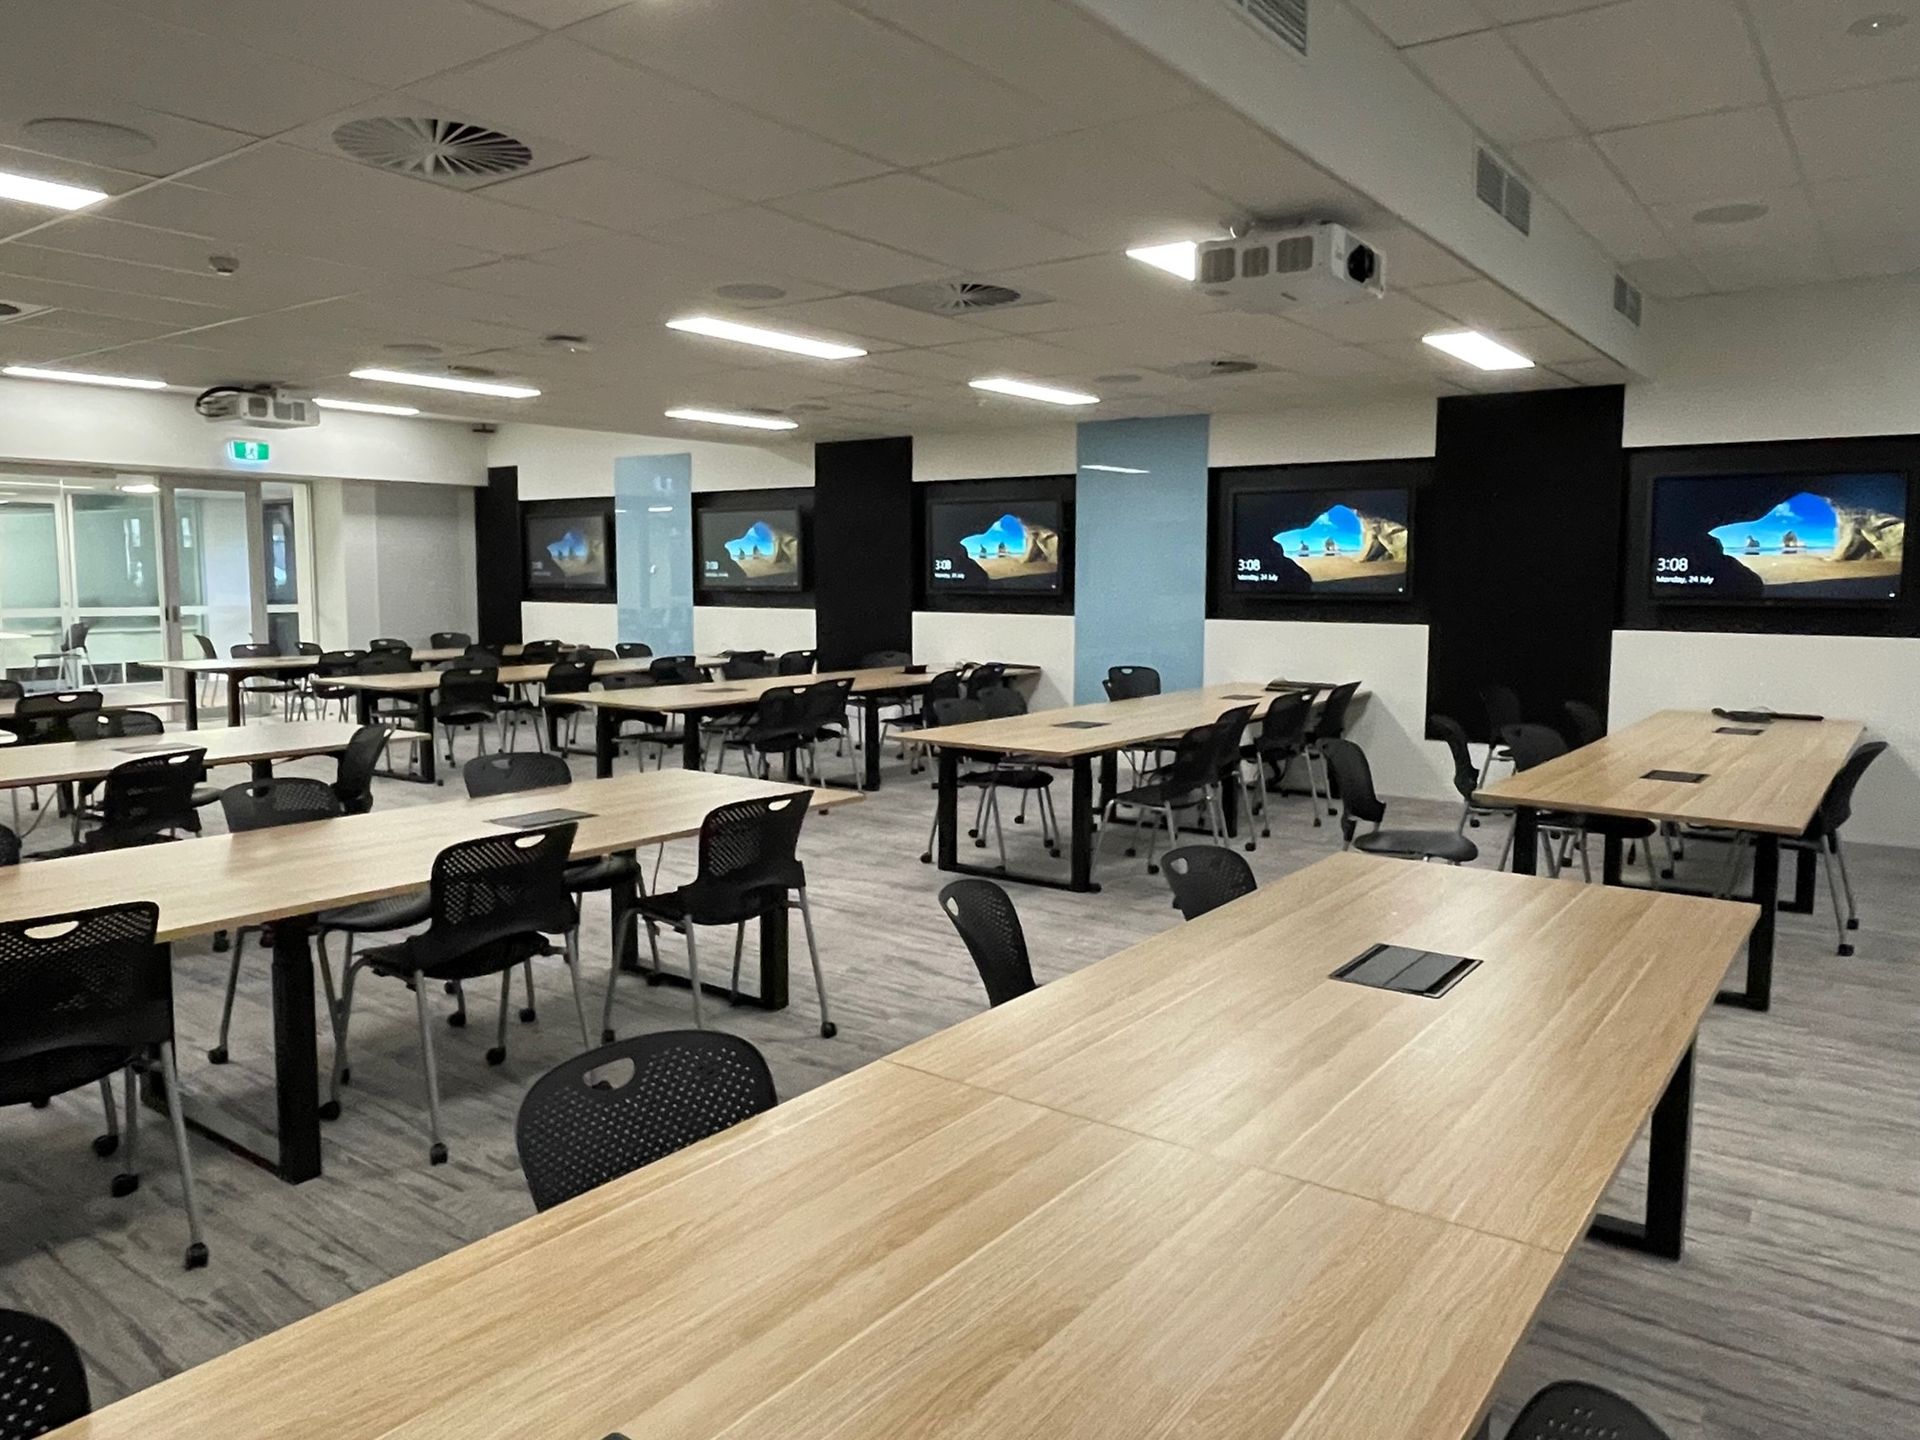 Image of training centre room with desks, chairs and television screens